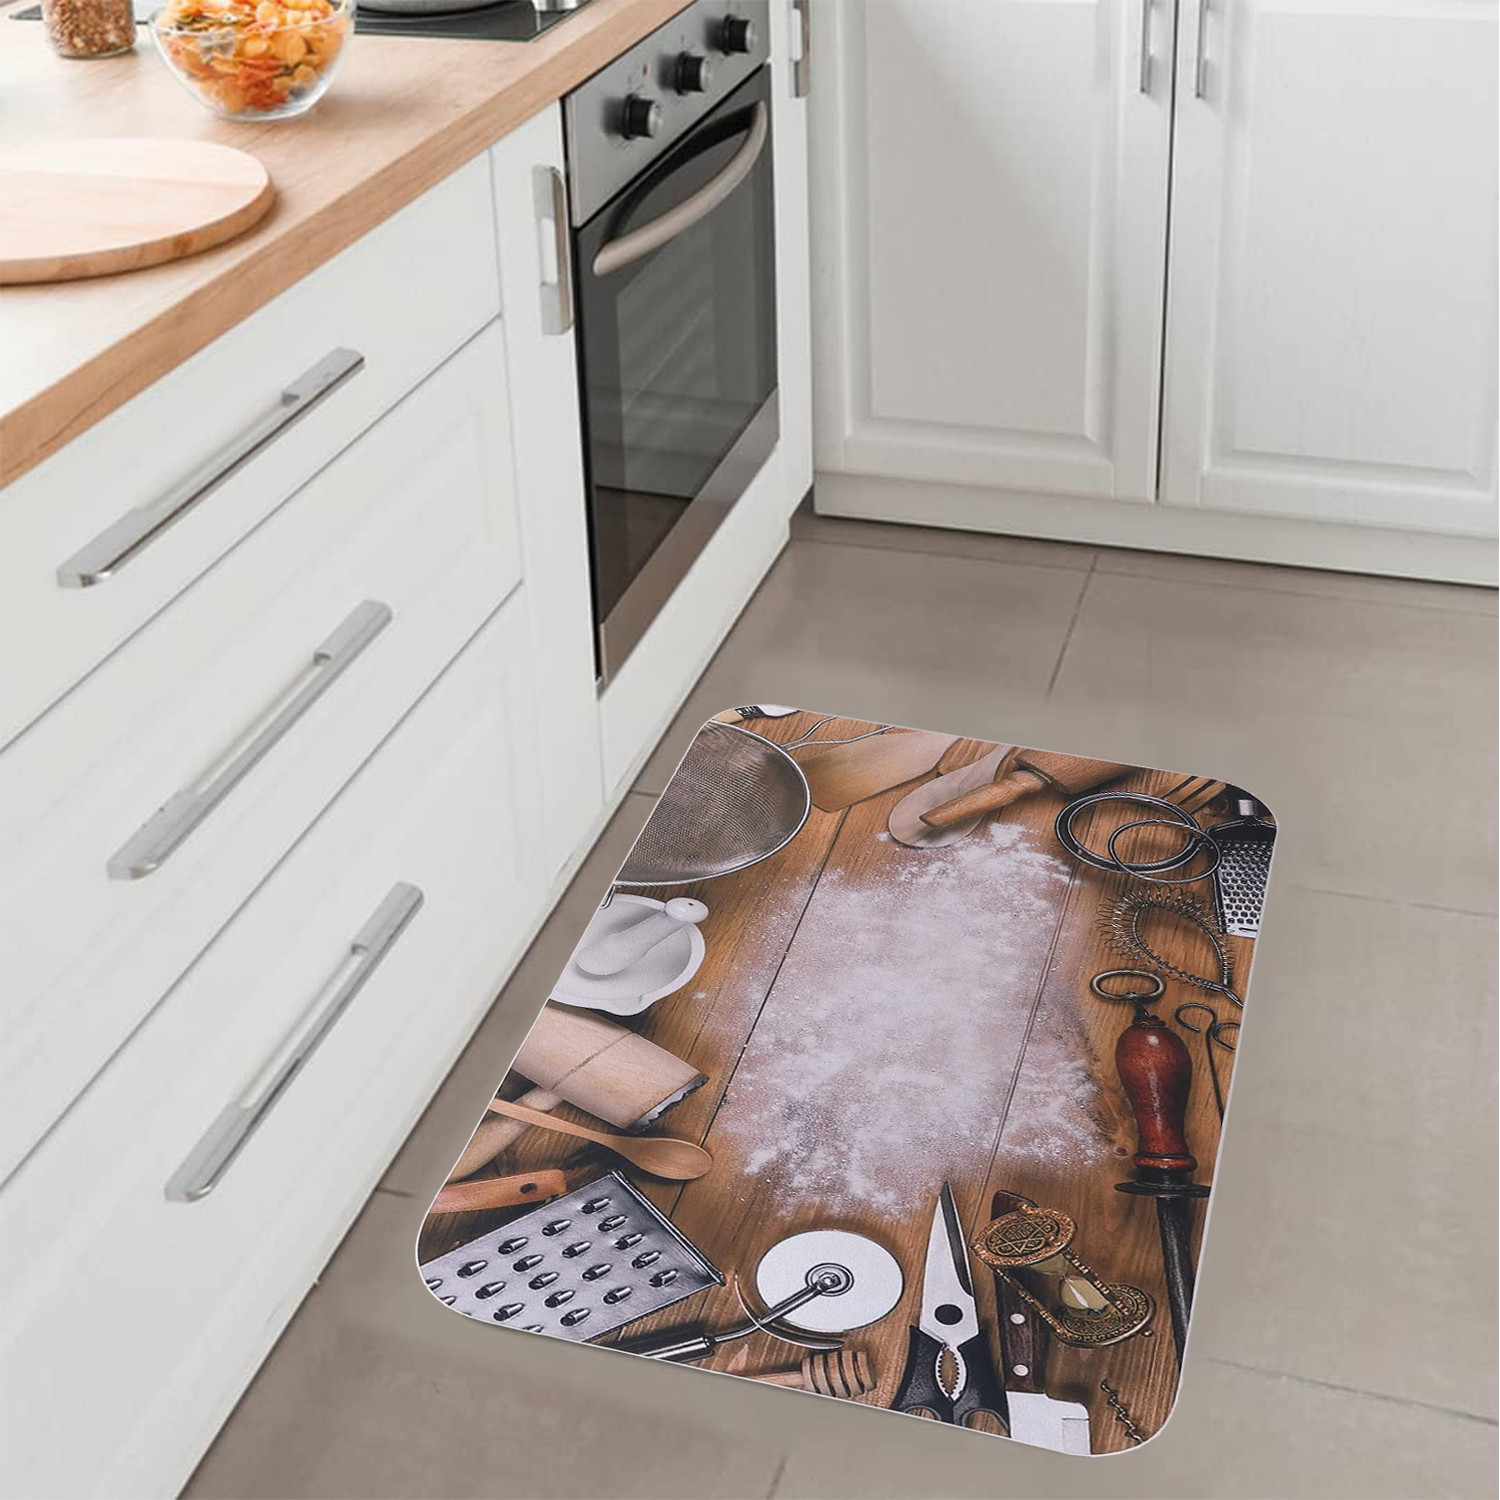 Kuber Industries PVC Kitchen Floor Mat|Anti-Skid Backing|Mats for Kitchen Floor |Easily Washable|Idol for Home, Kitchen Entrance| CF-220816 | Multi